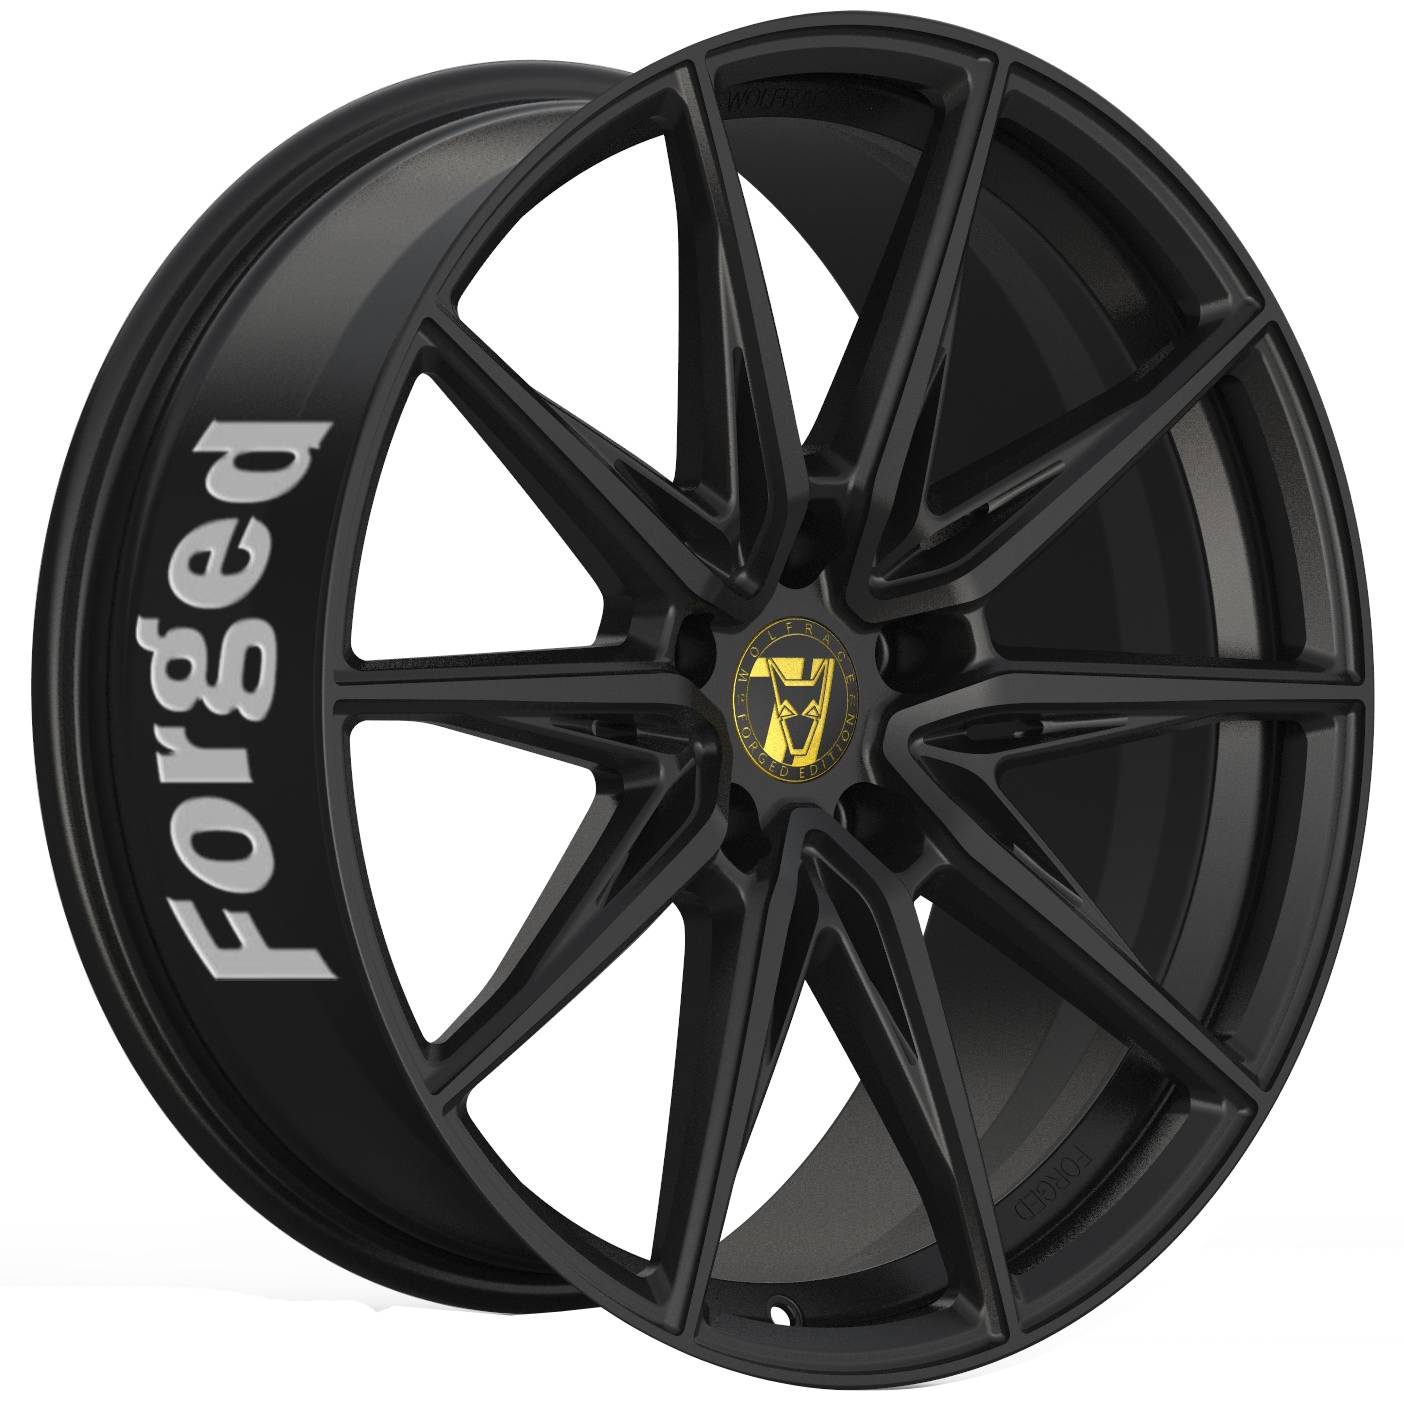 Demon Wheels 71 Forged Edition Urban Racer Forged [10.5x23] -5x114.3- ET 30